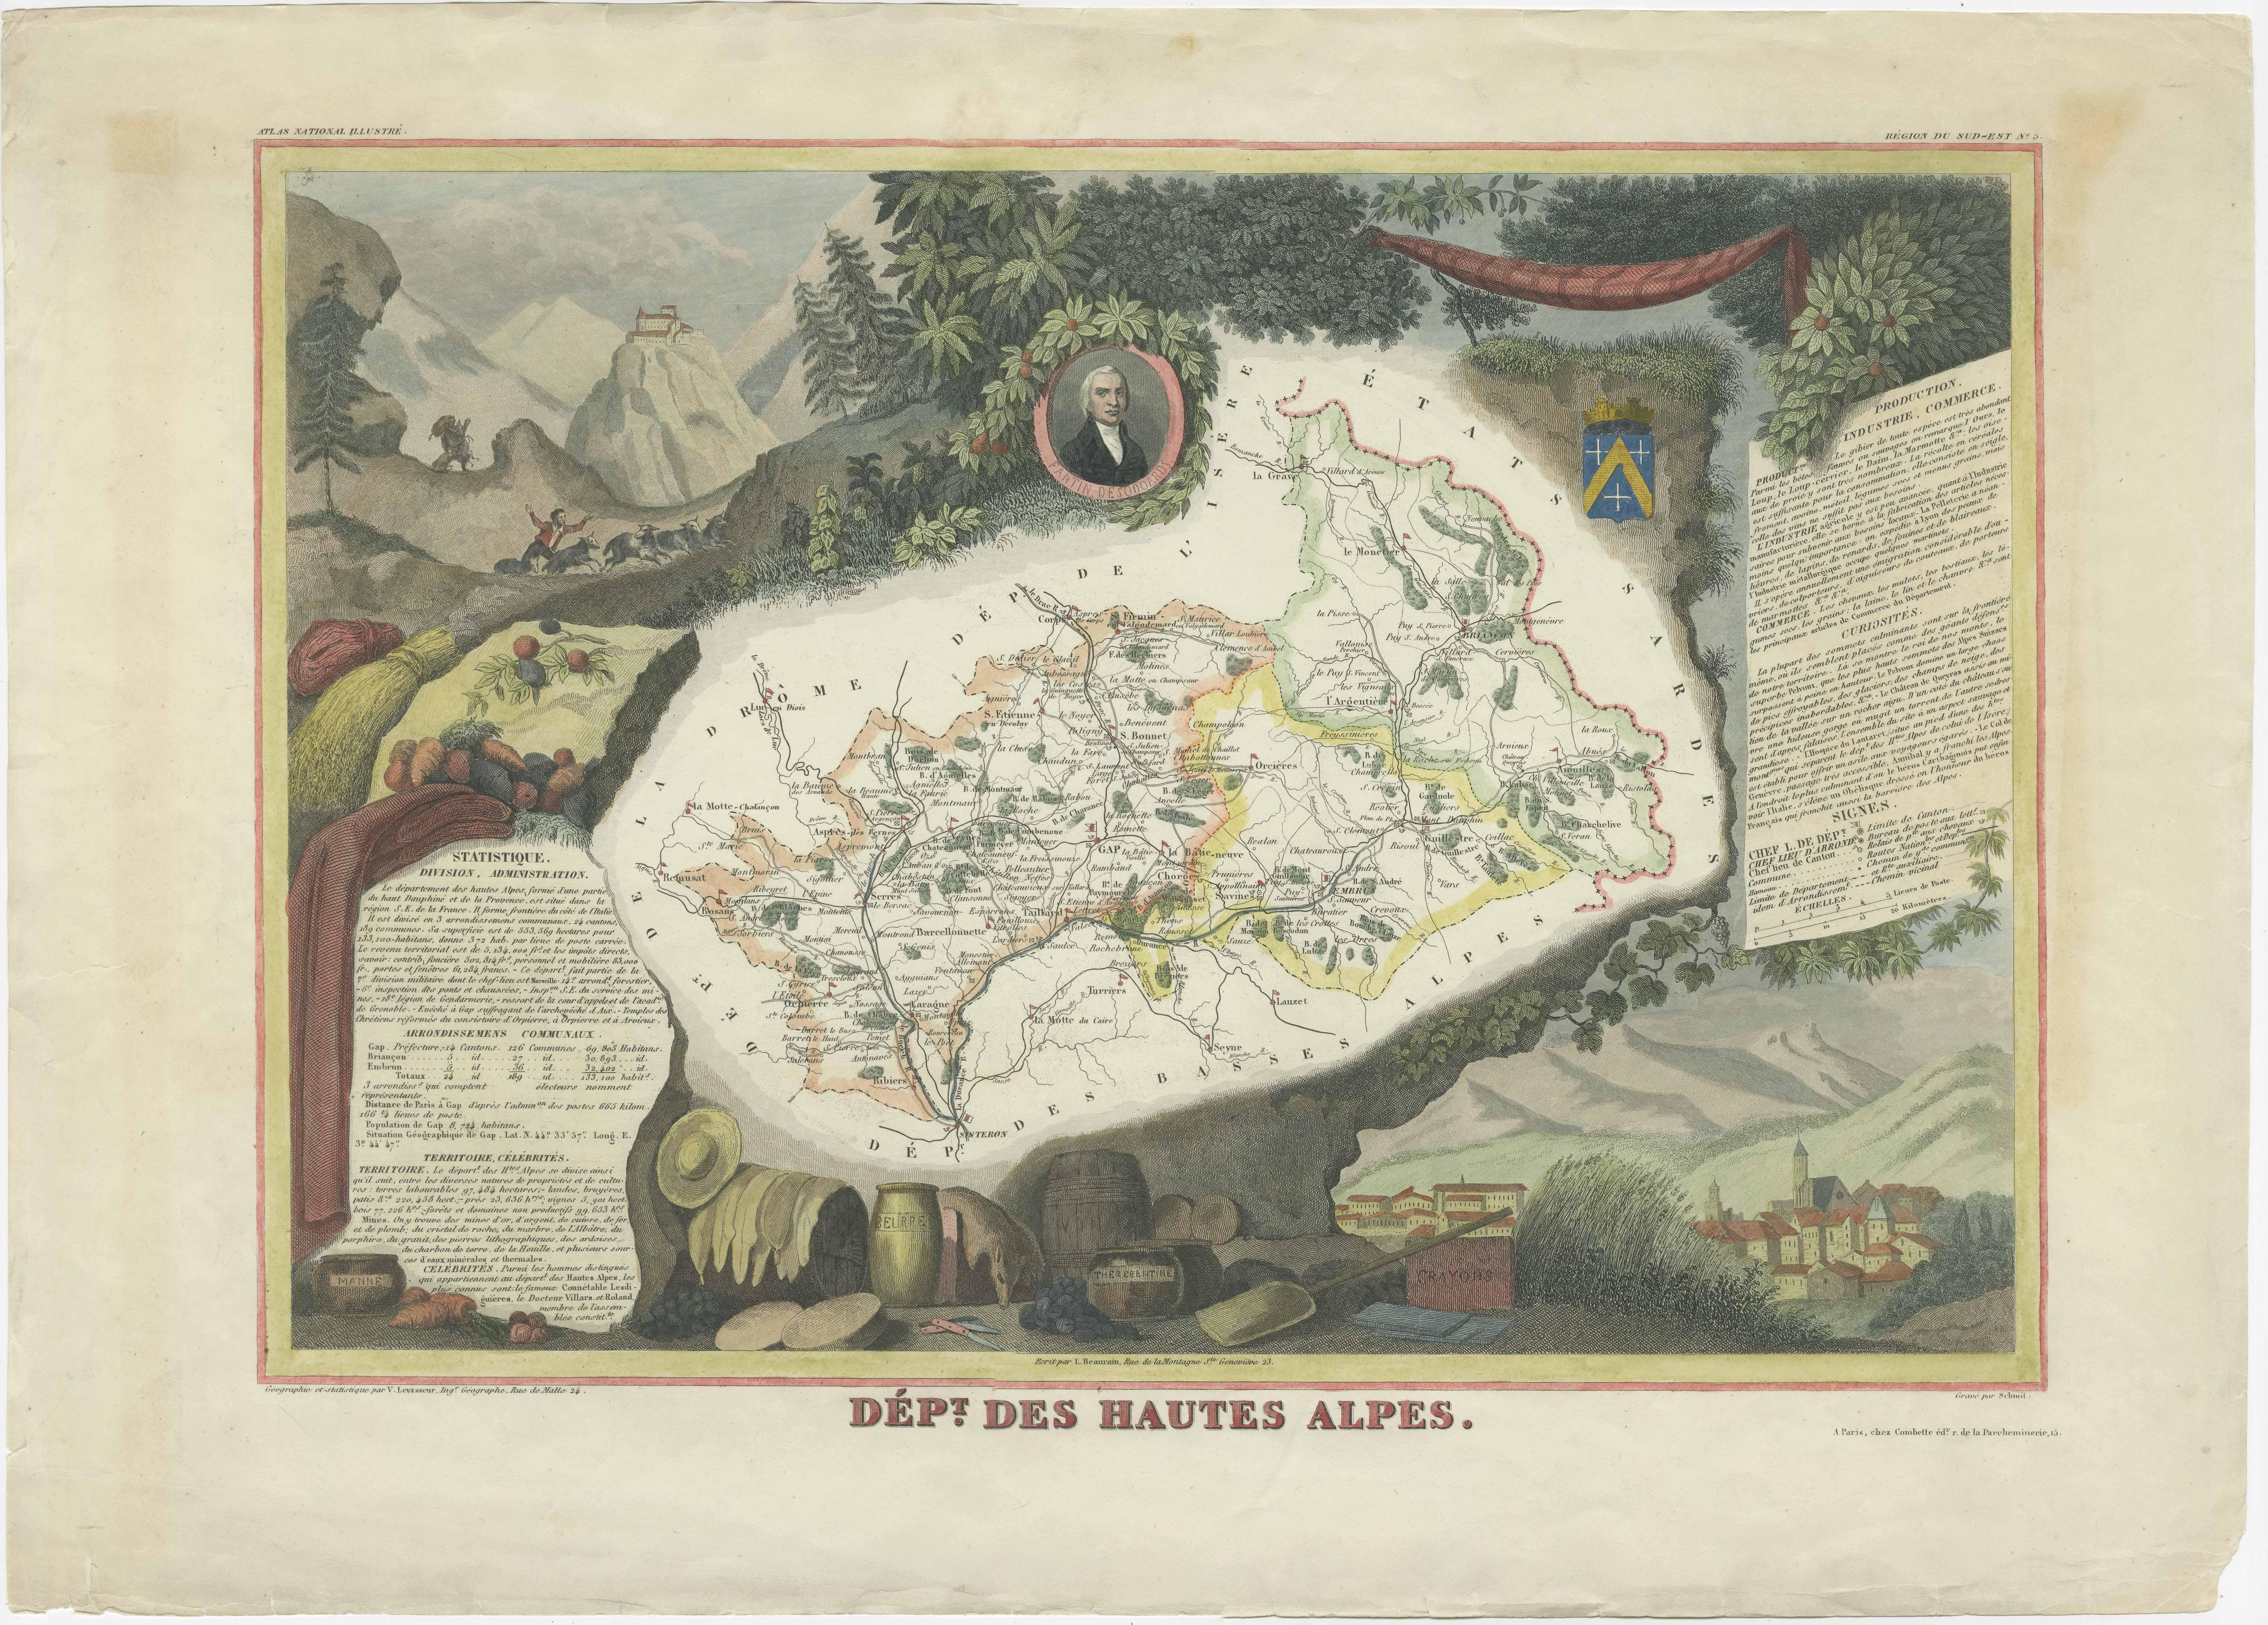 Antique map titled 'Dépt. des Hautes Alpes'. Map of the French department of Hautes Alpes, France. This area of France is known for its production of Coteaux and Collines Rhodaniennes wines. The area is also famous for its chestnuts. The whole is